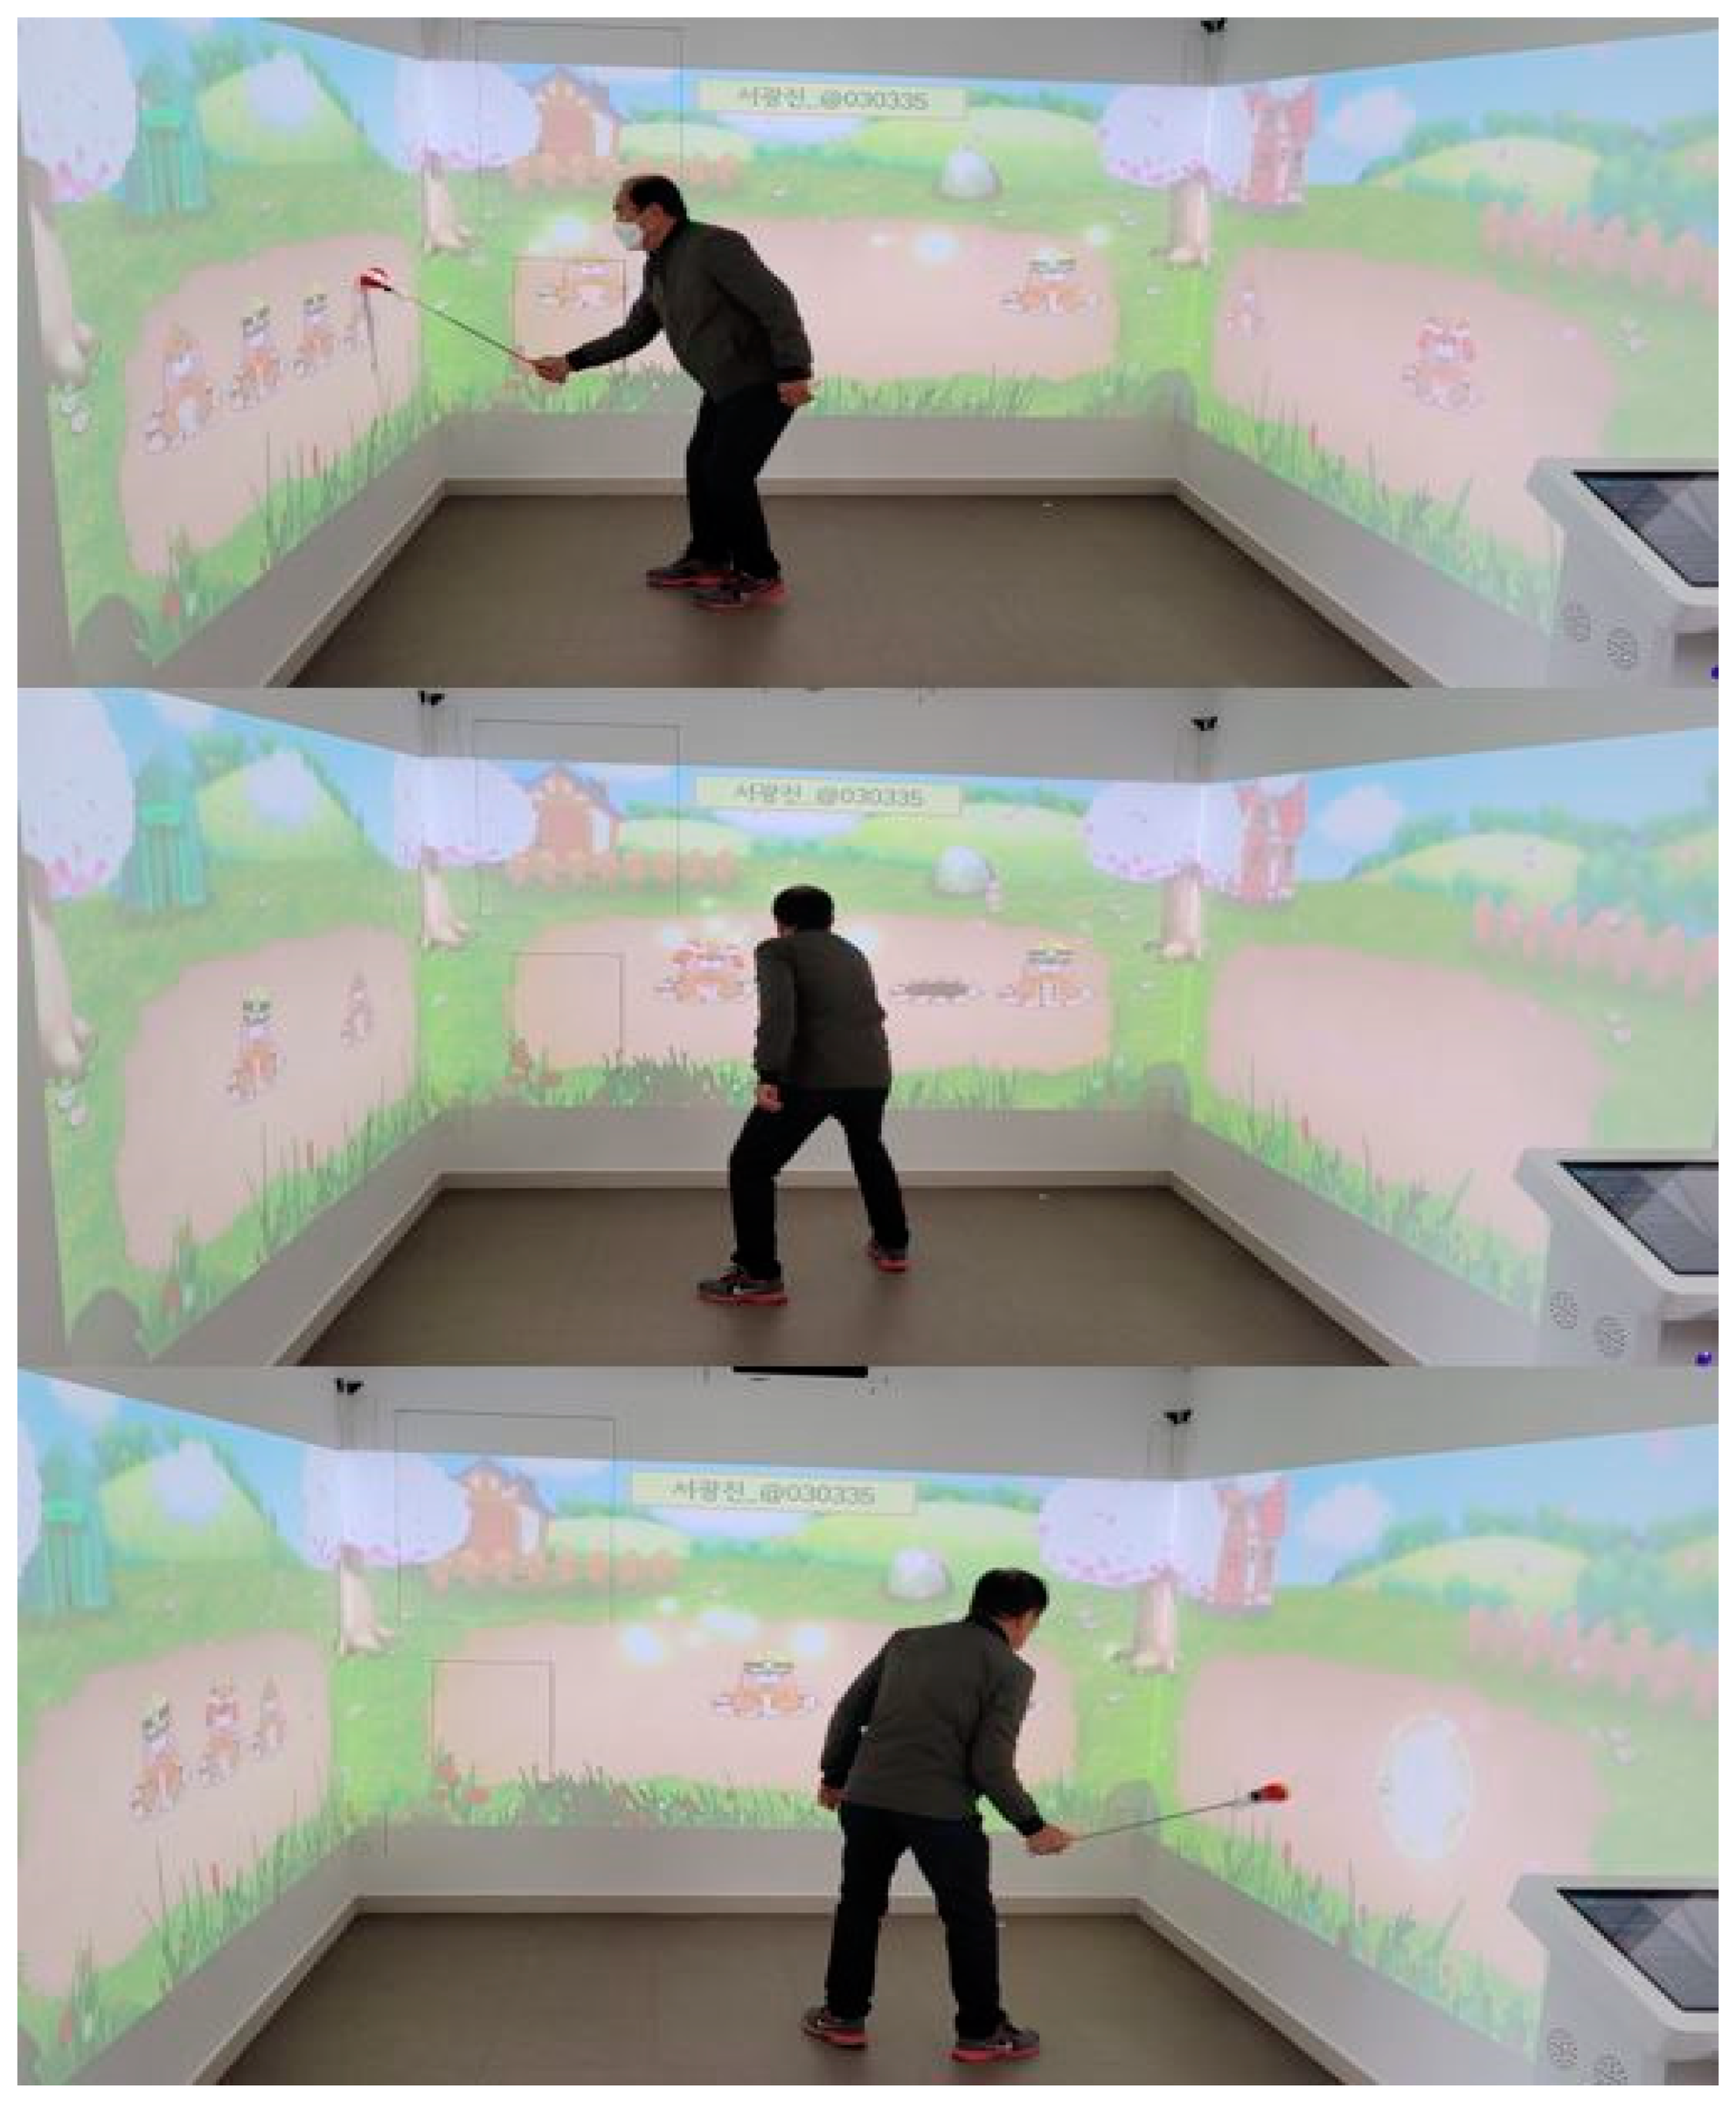 Healthcare | Free Full-Text | Effects of Semi-Immersive Virtual Reality-Based  Cognitive Training Combined with Locomotor Activity on Cognitive Function  and Gait Ability in Community-Dwelling Older Adults